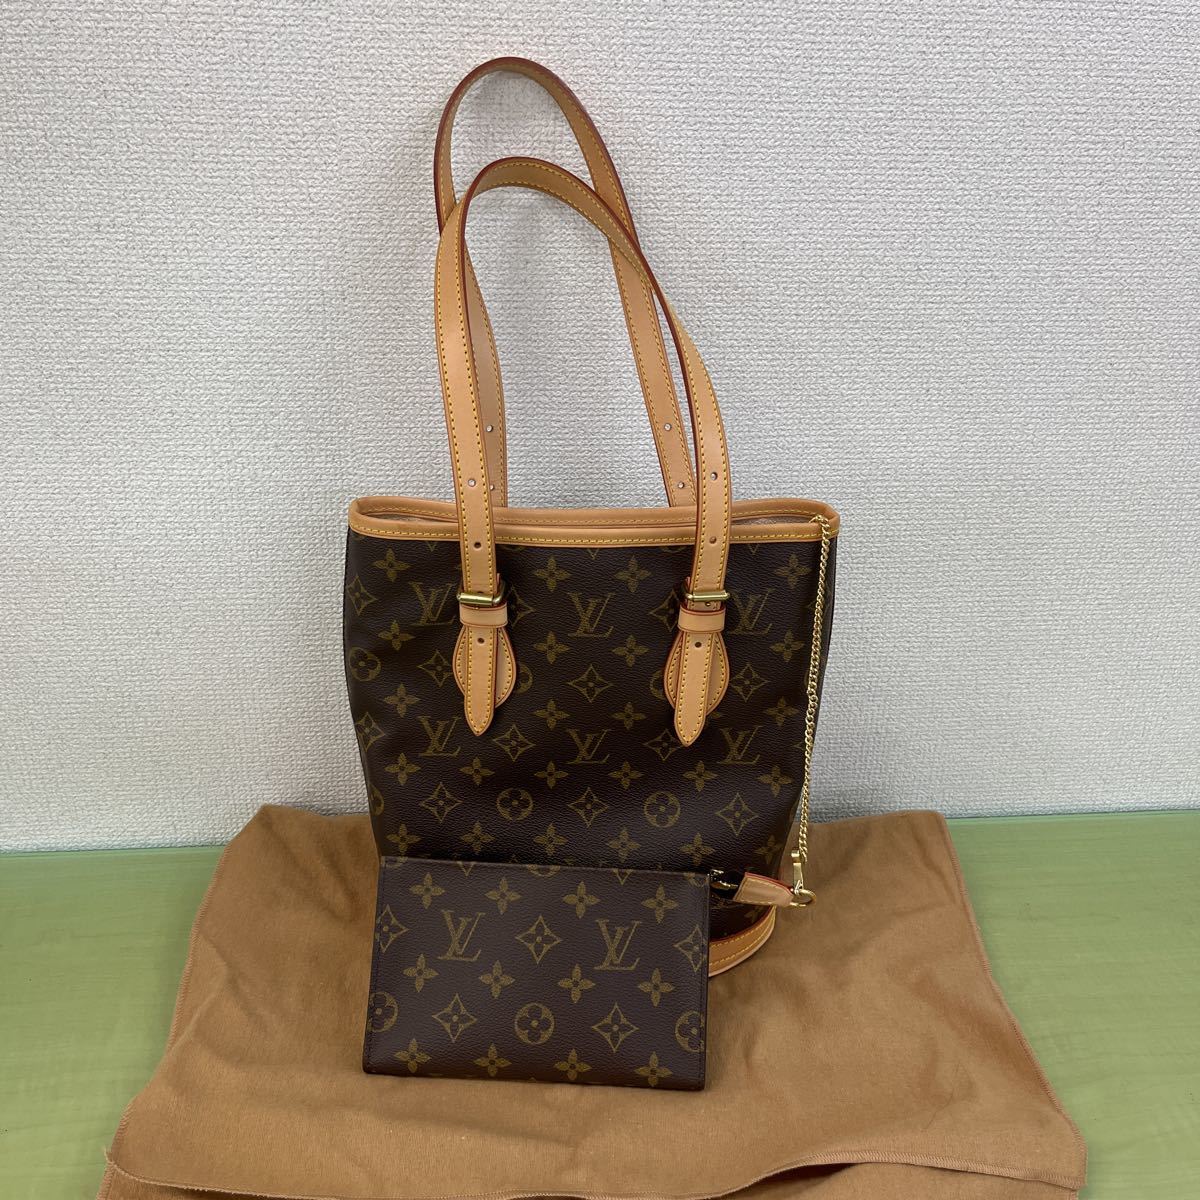 ◎LOUIS VUITTON ルイヴィトントートバッグプチ・バケットM42238